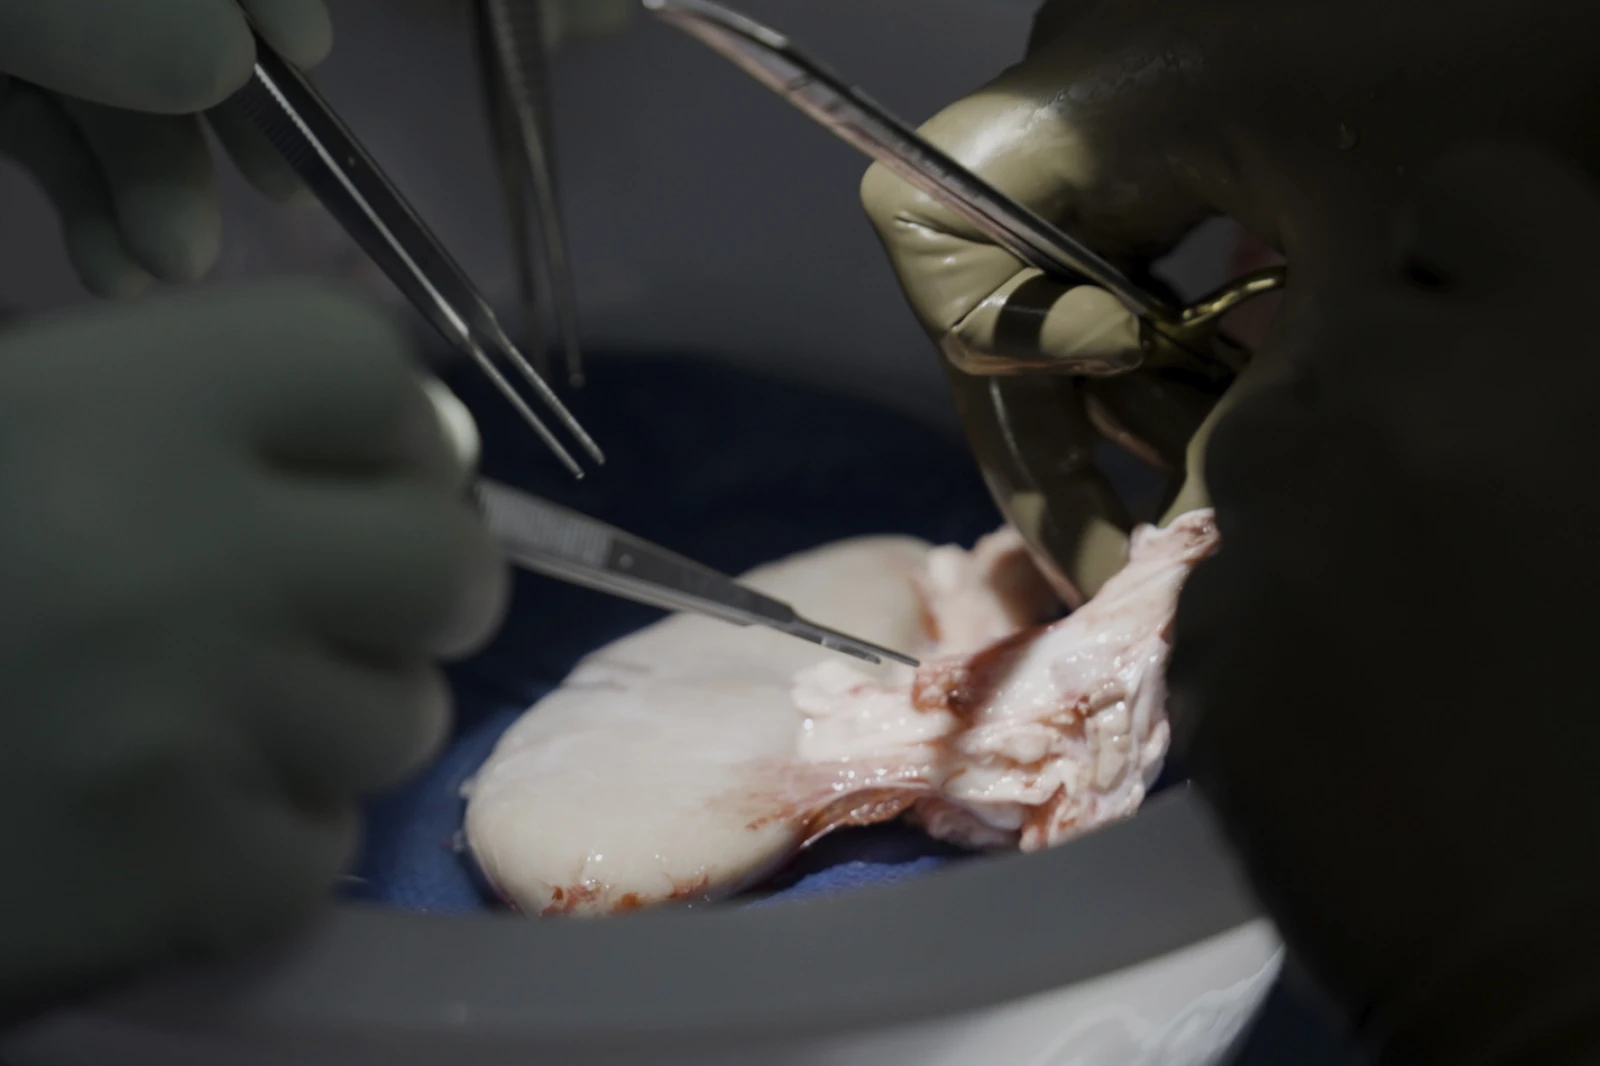 Pig kidney works in a donated body for over a month, a step toward animal-human transplants